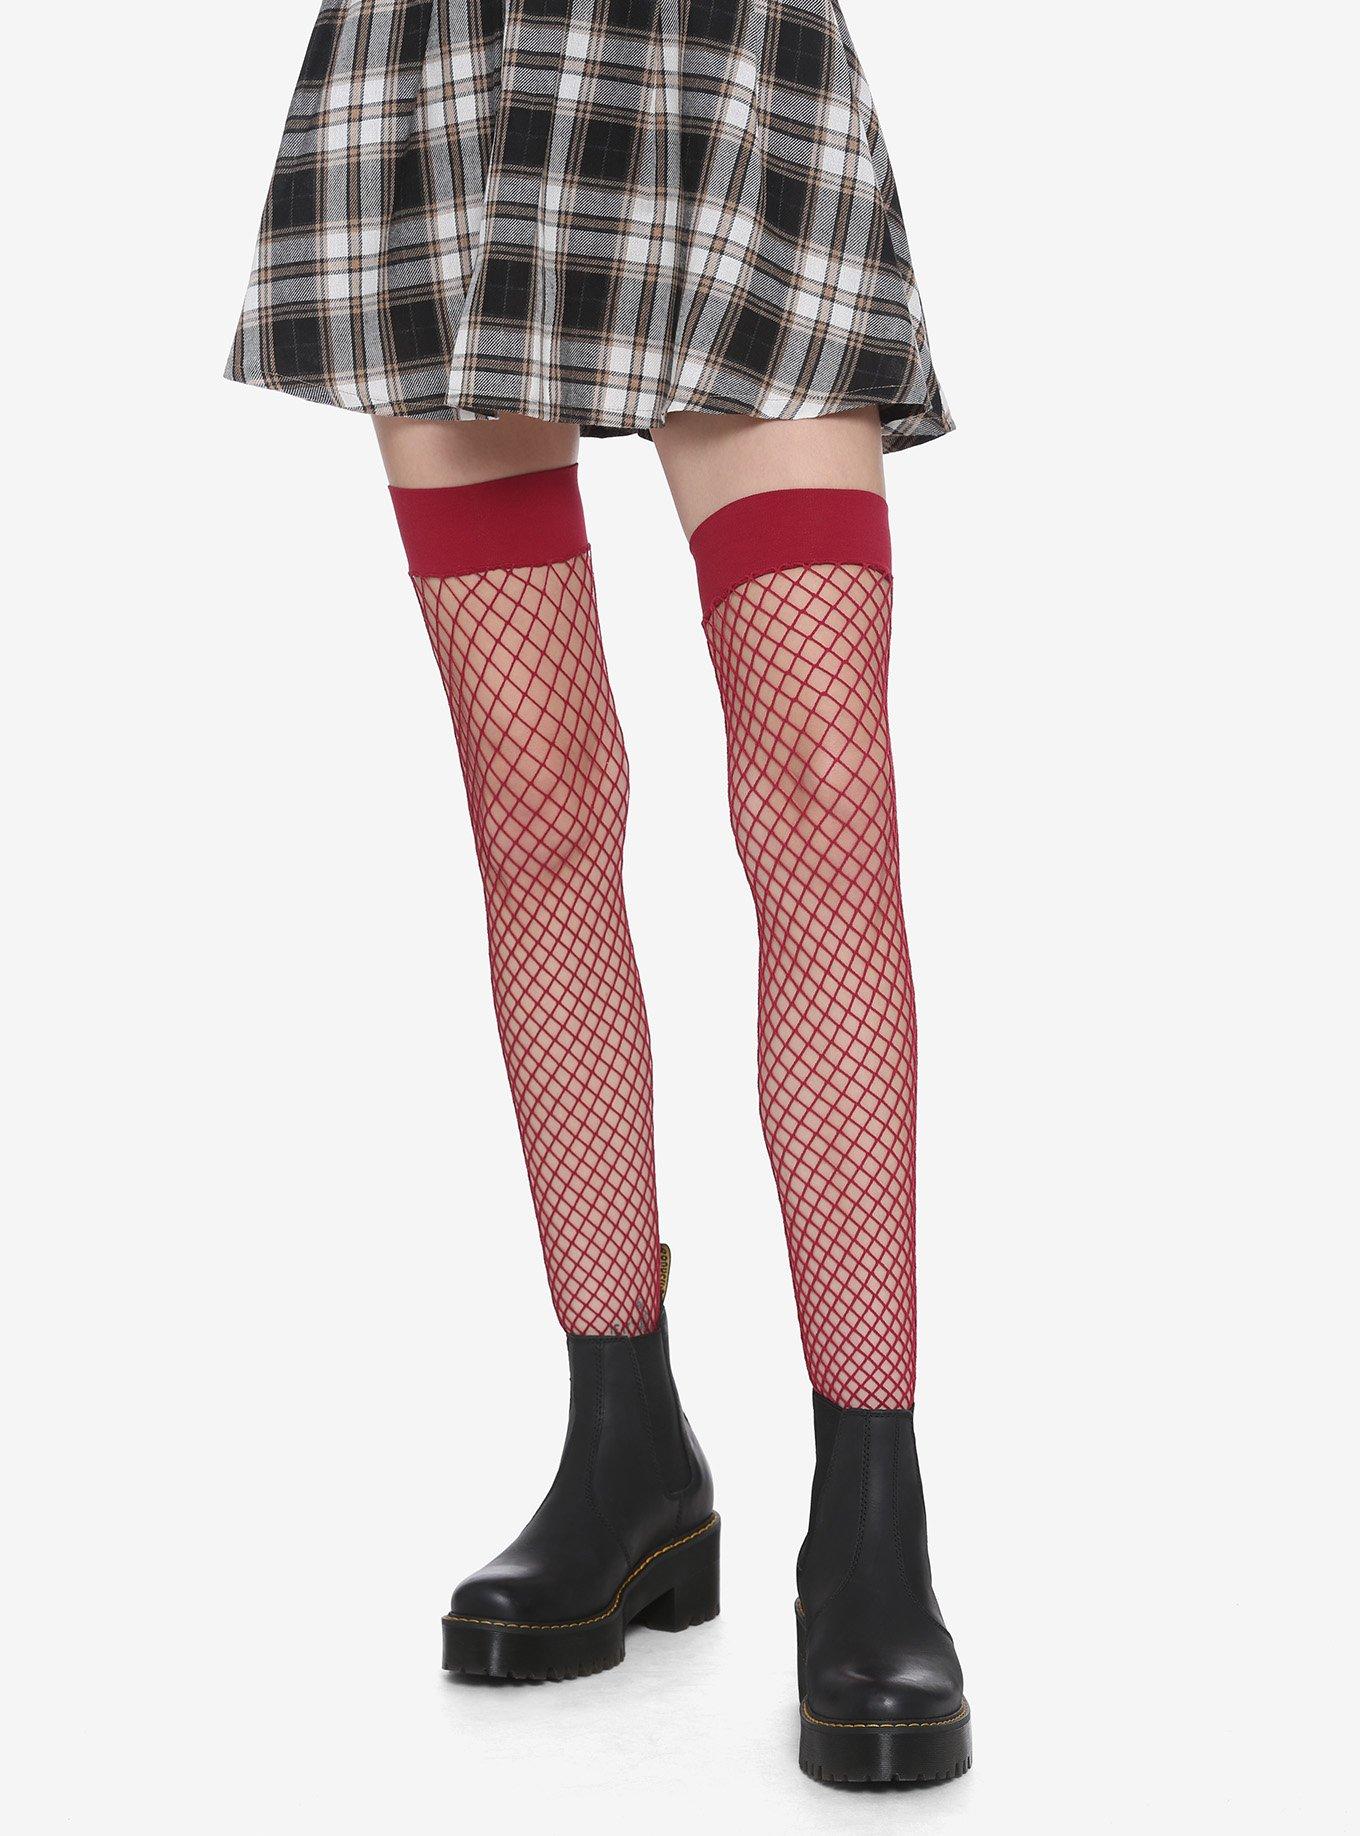 HOT TOPIC RED ELASTIC TOP BIG FISHNET THIGH HIGH STOCKINGS NEW